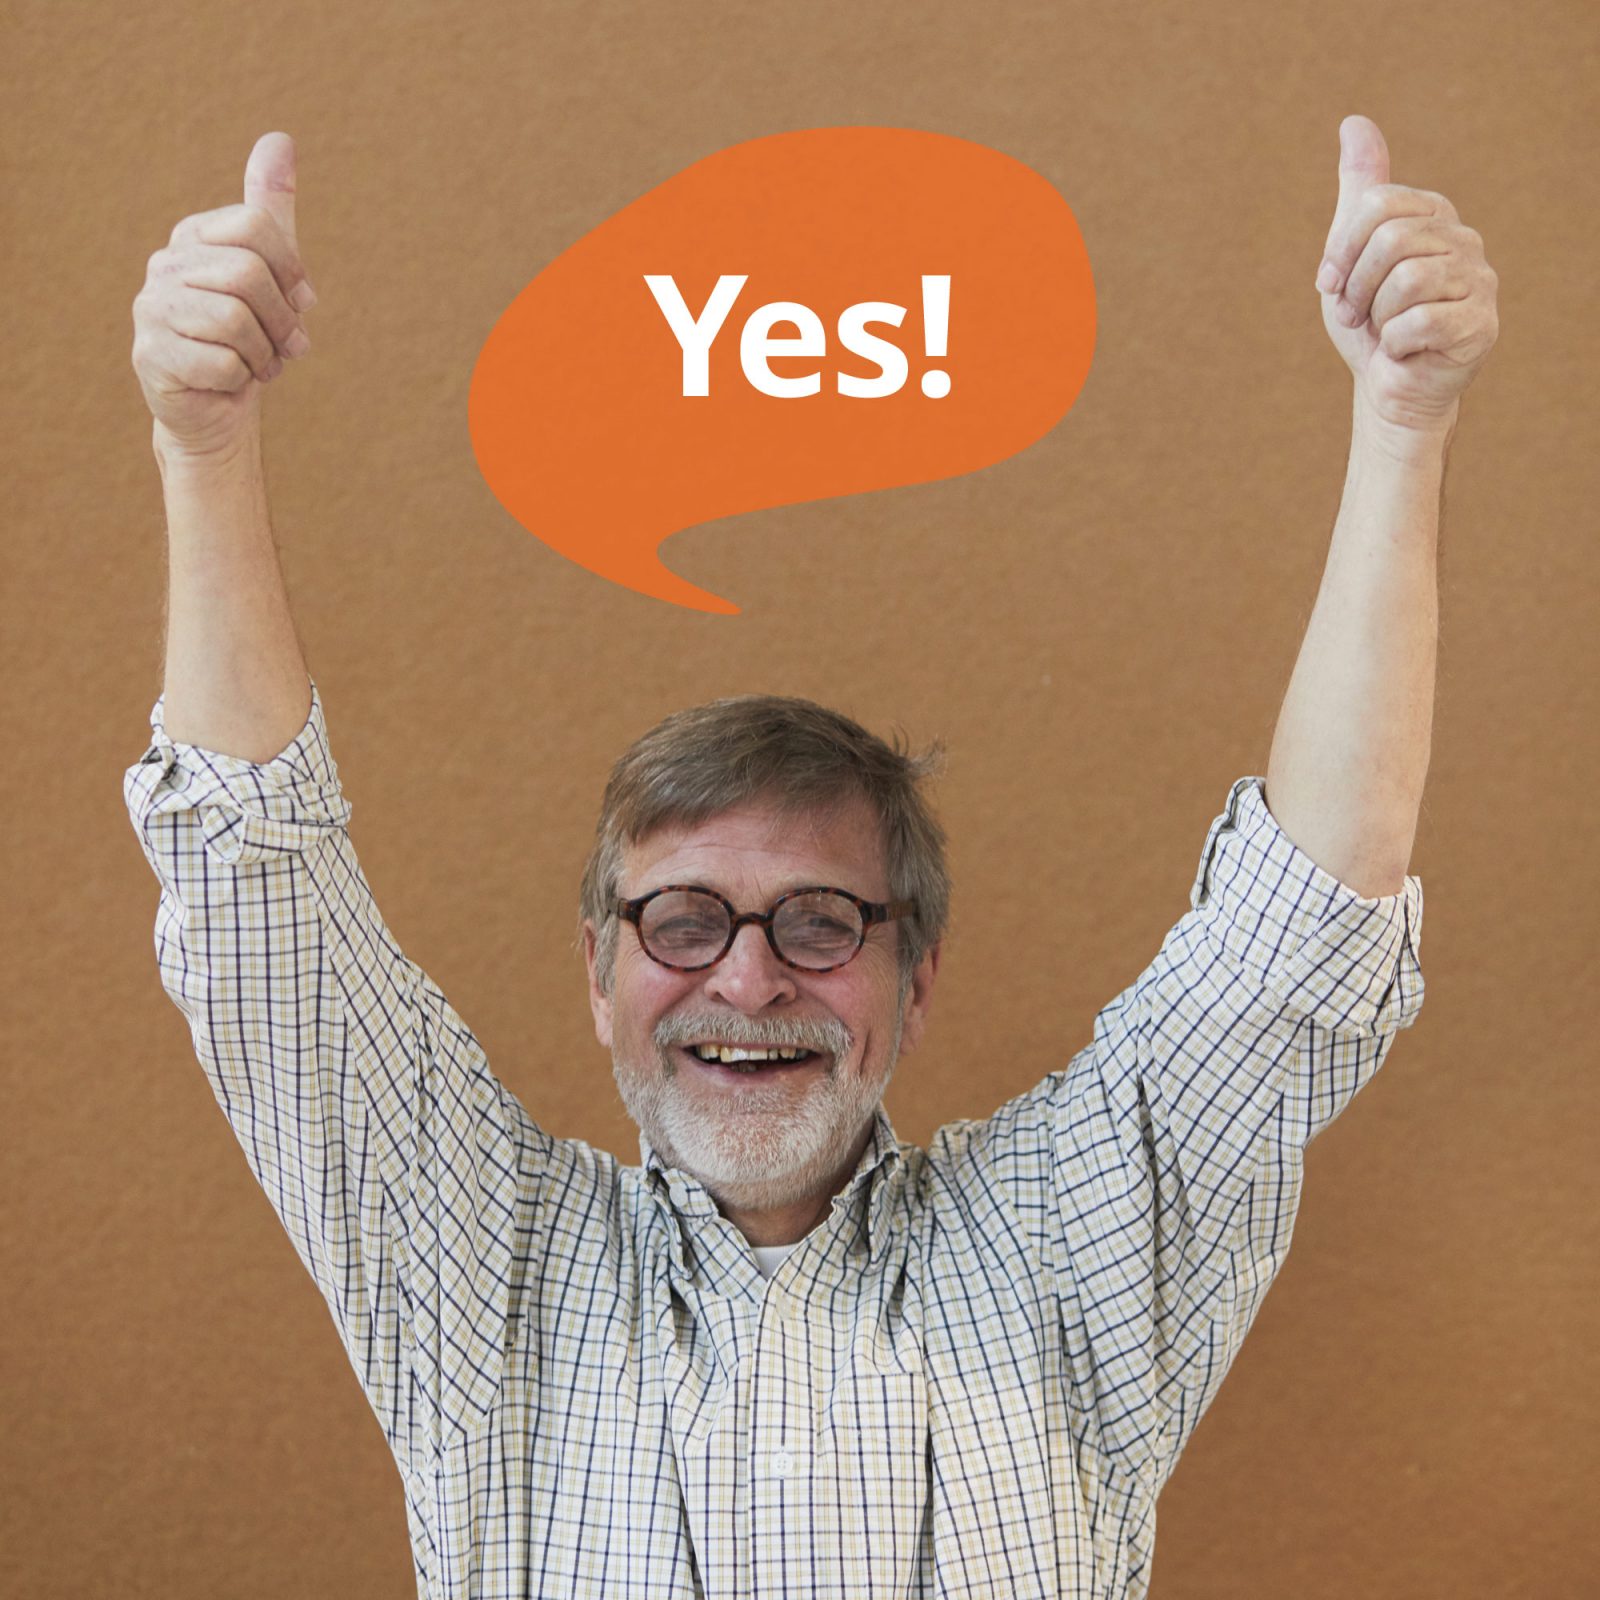 Grey-haired man in check shirt smiles and puts two thumbs up. A speech bubble contains the text 'Yes'.